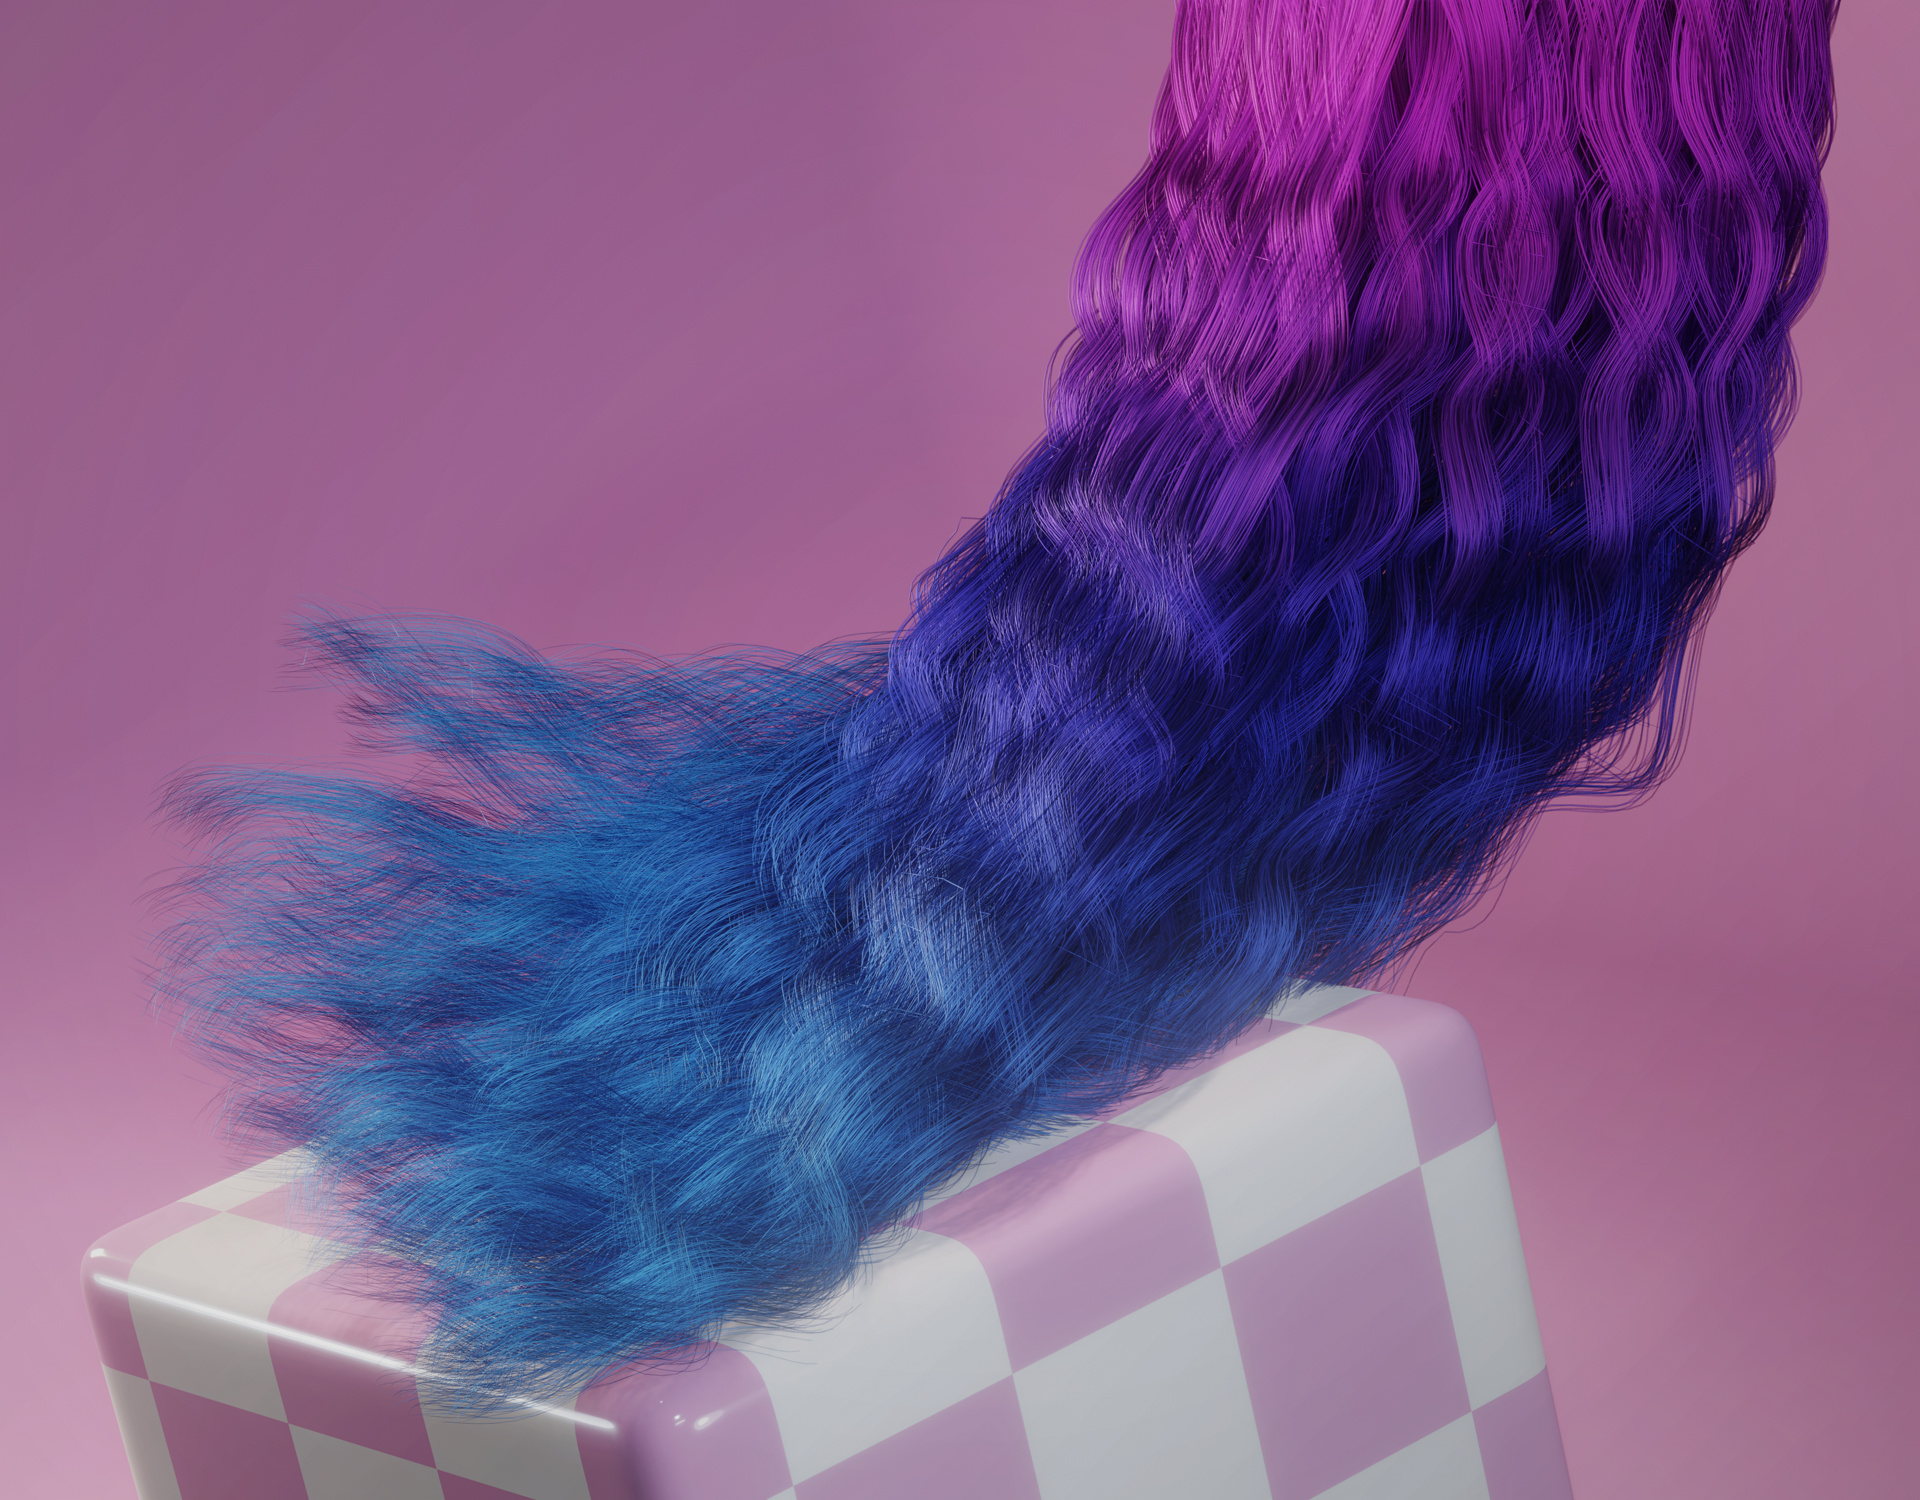 1. "Pink Blue Hair Guy Twitch" by Twitch - wide 7